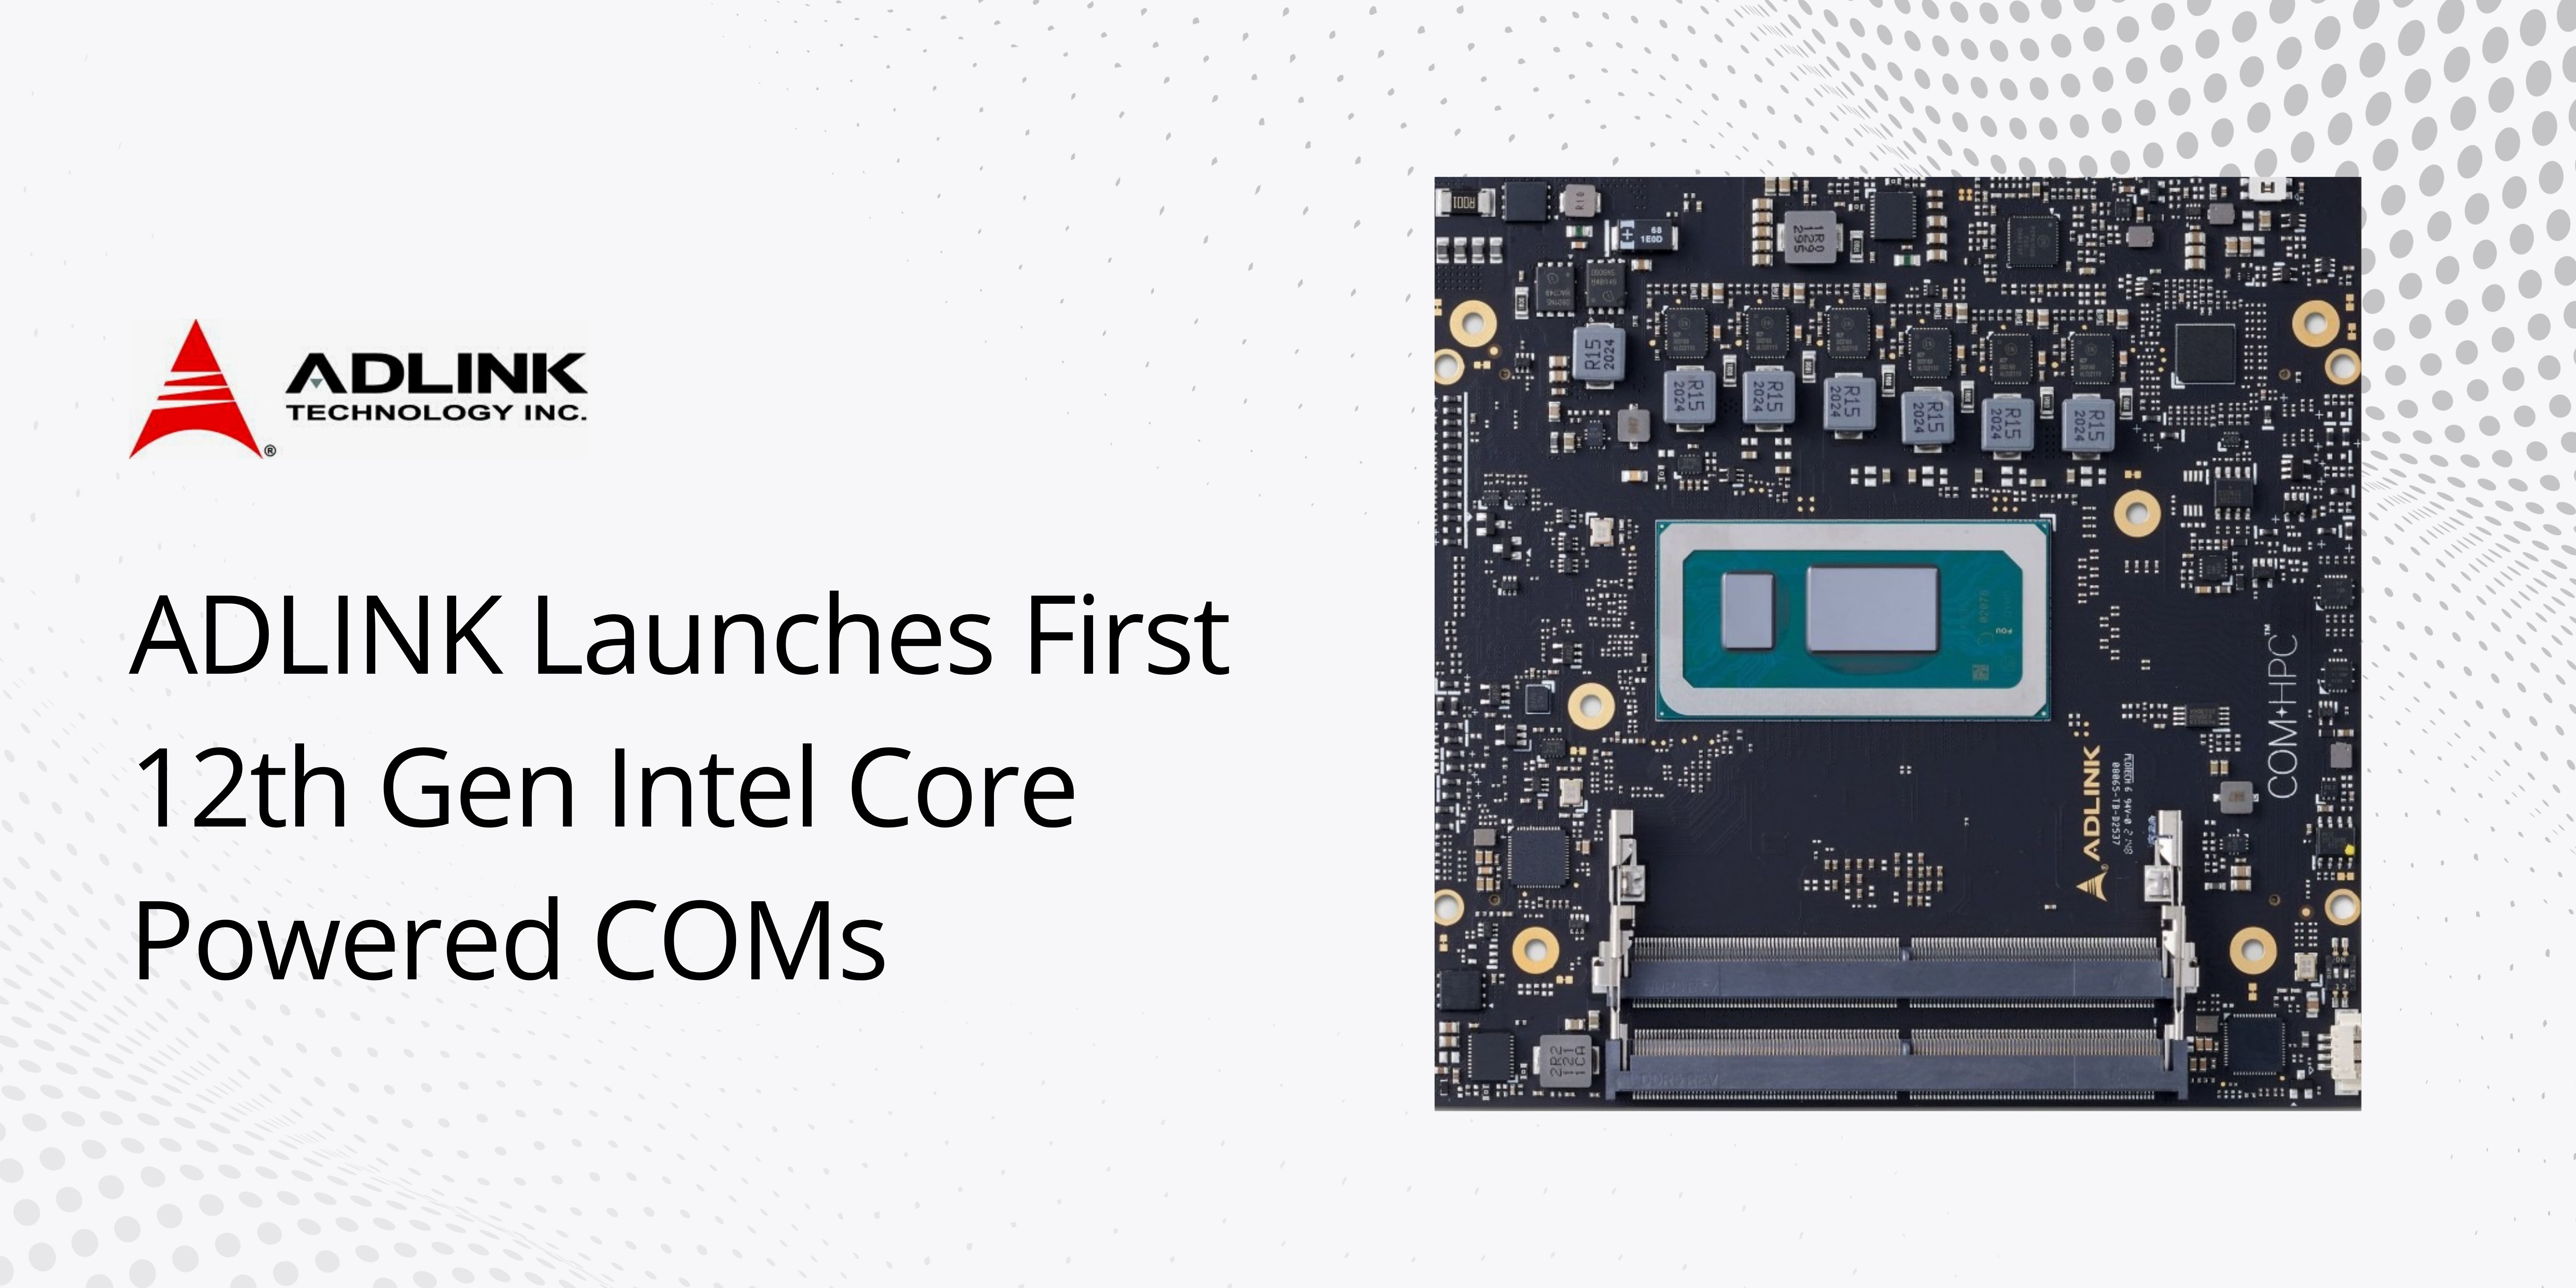 [BLOG] ADLINK Launches First 12th Gen Intel Core Powered COMs